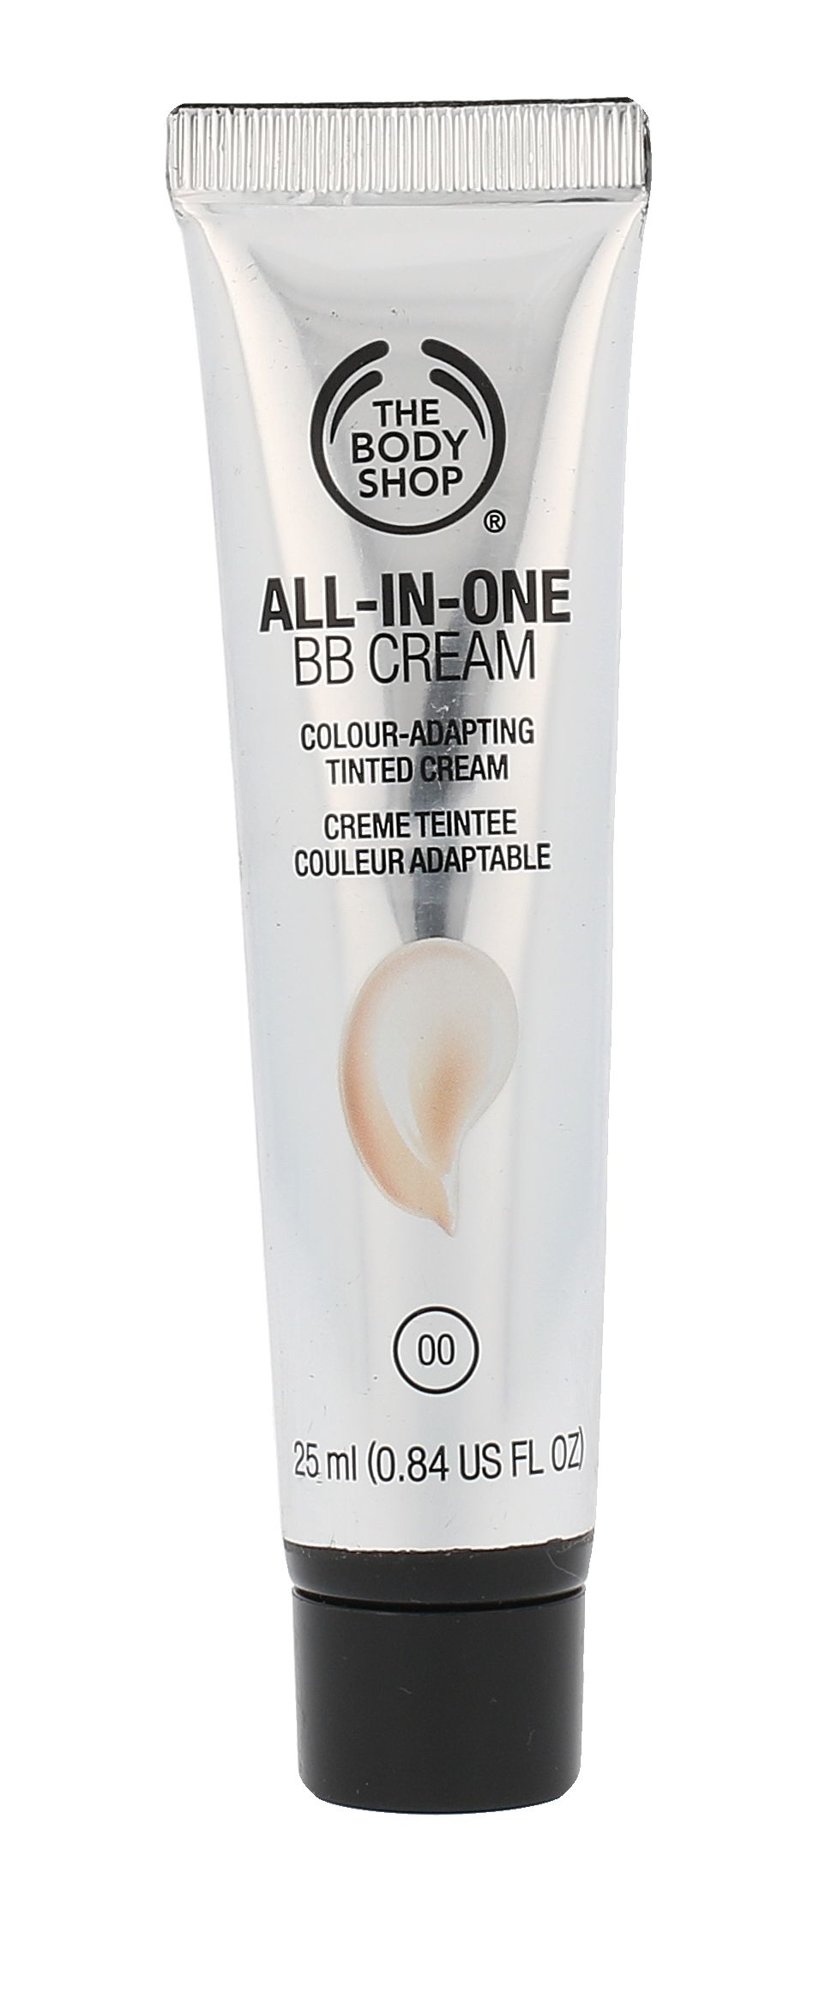 The Body Shop All-In-One BB Cream